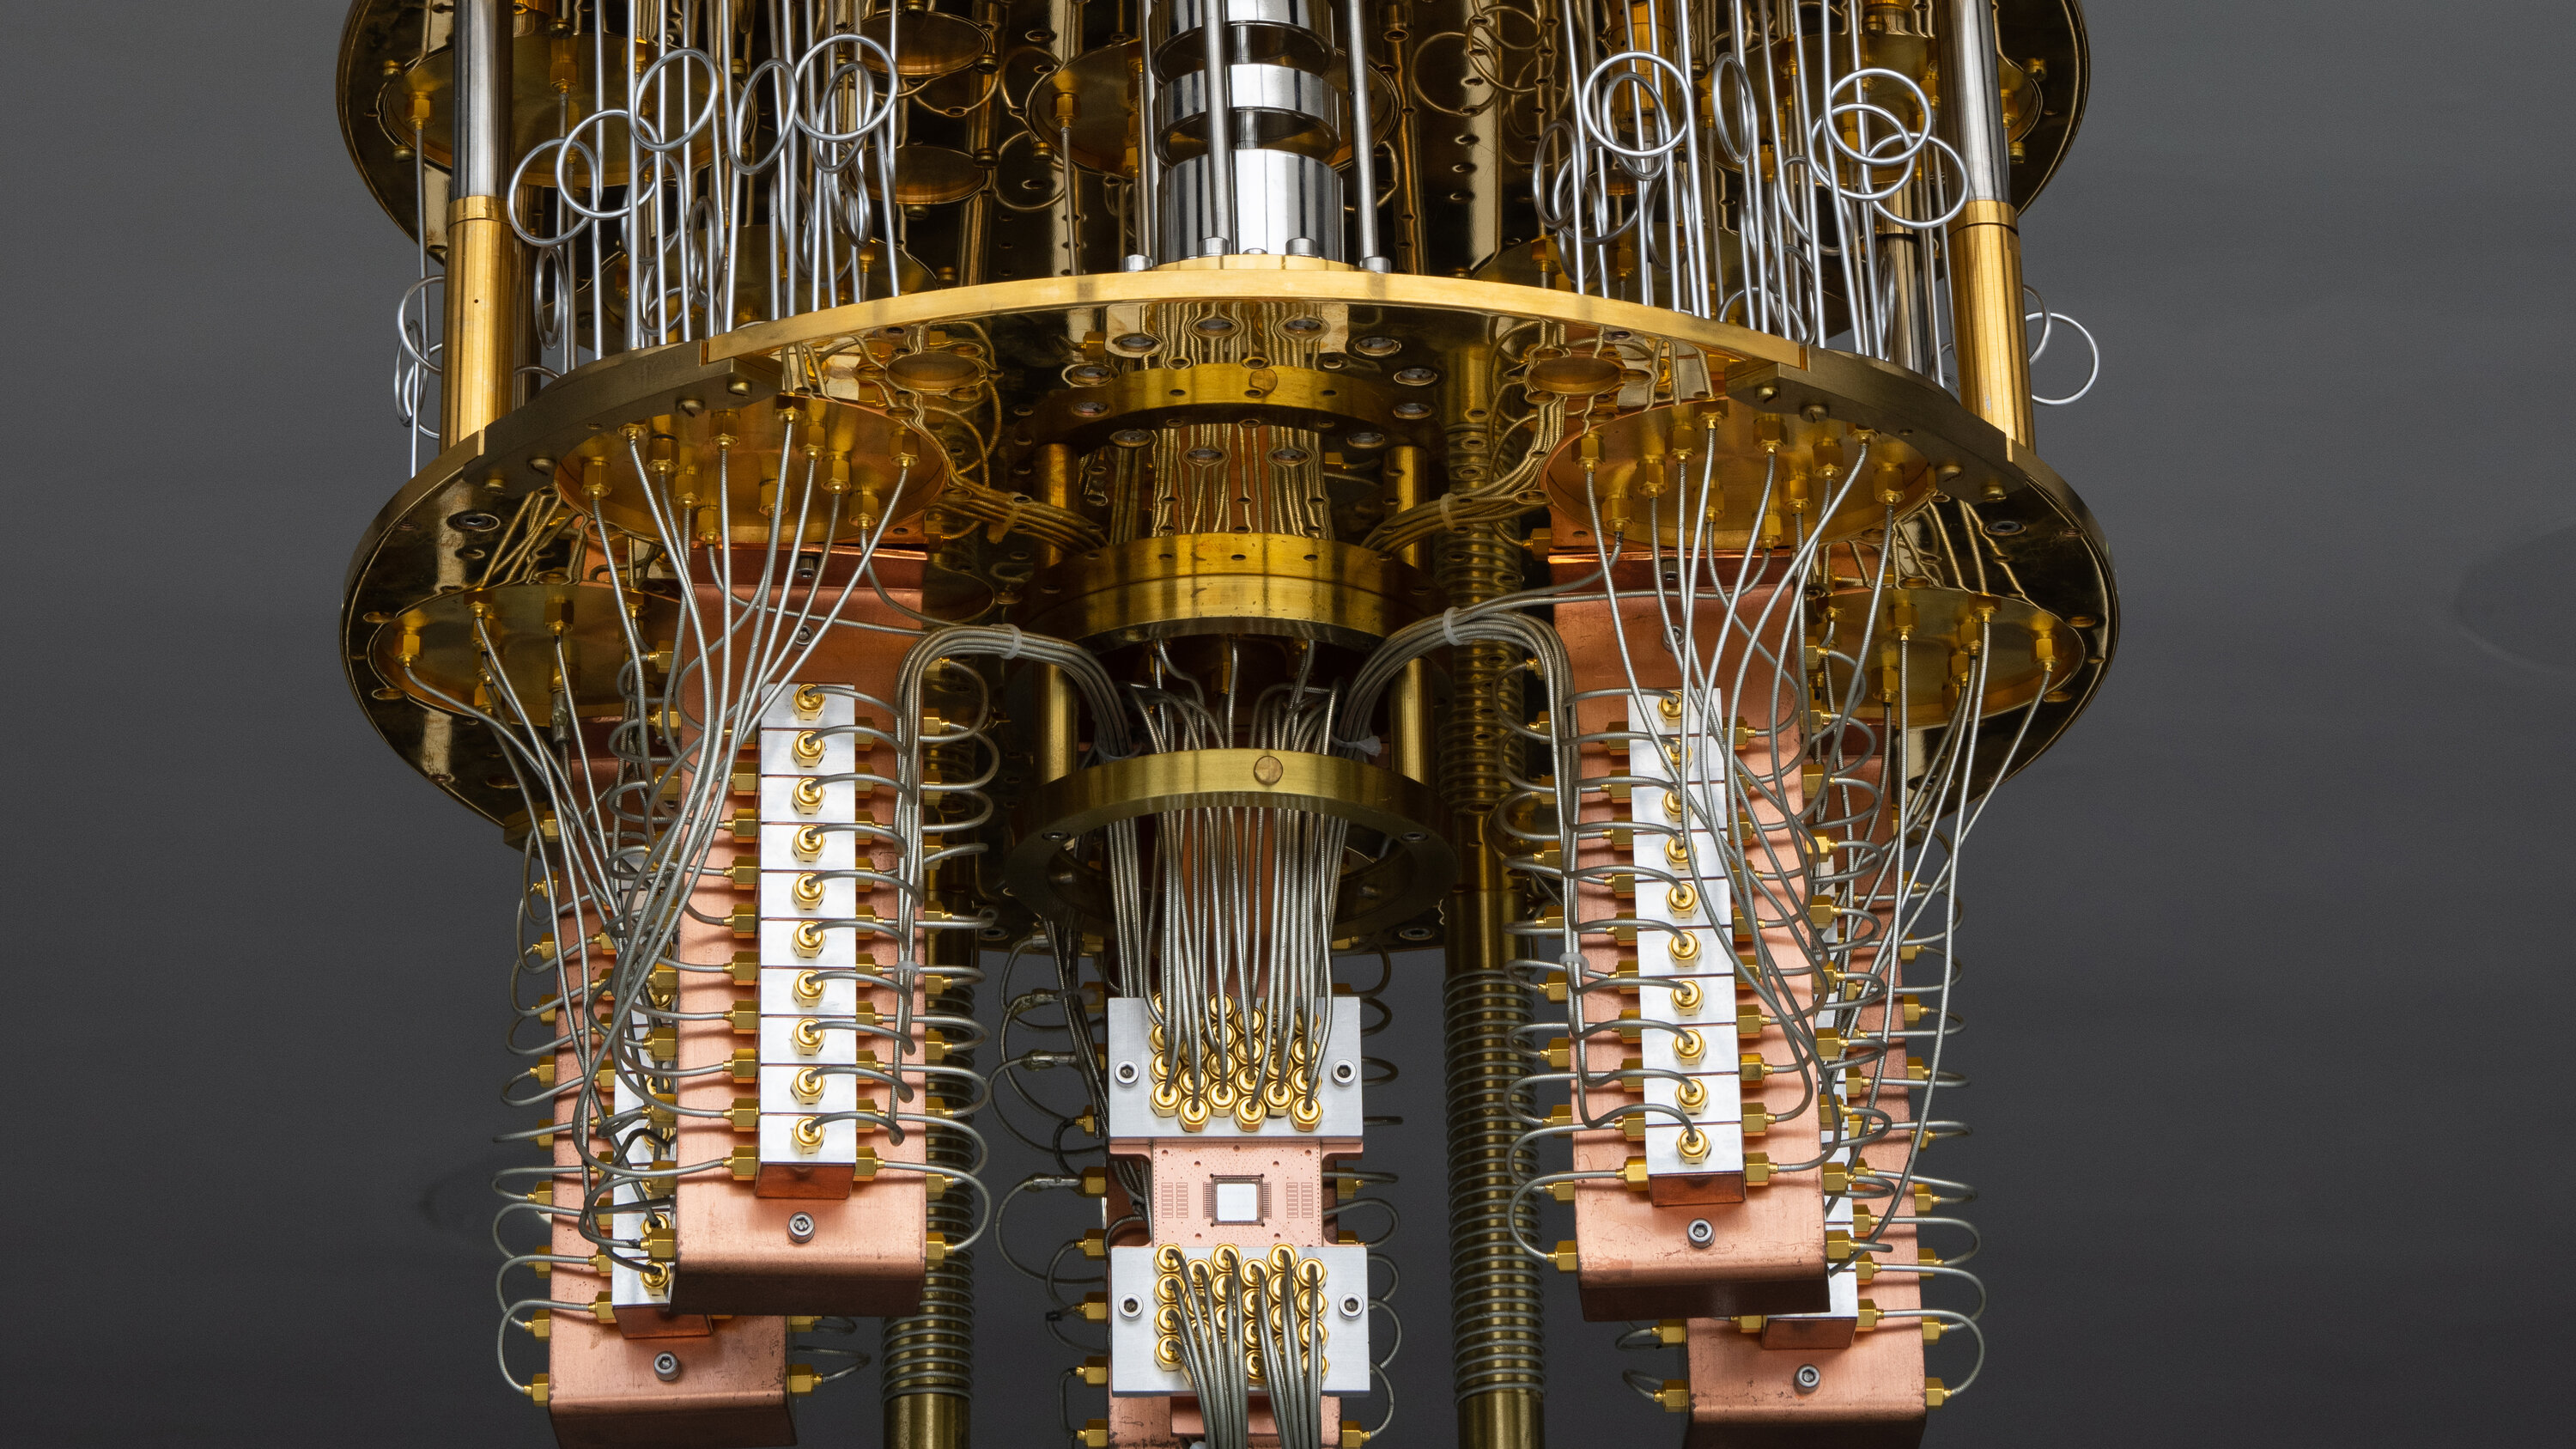 IBM quantum computing updates: System Two and Heron - The Verge